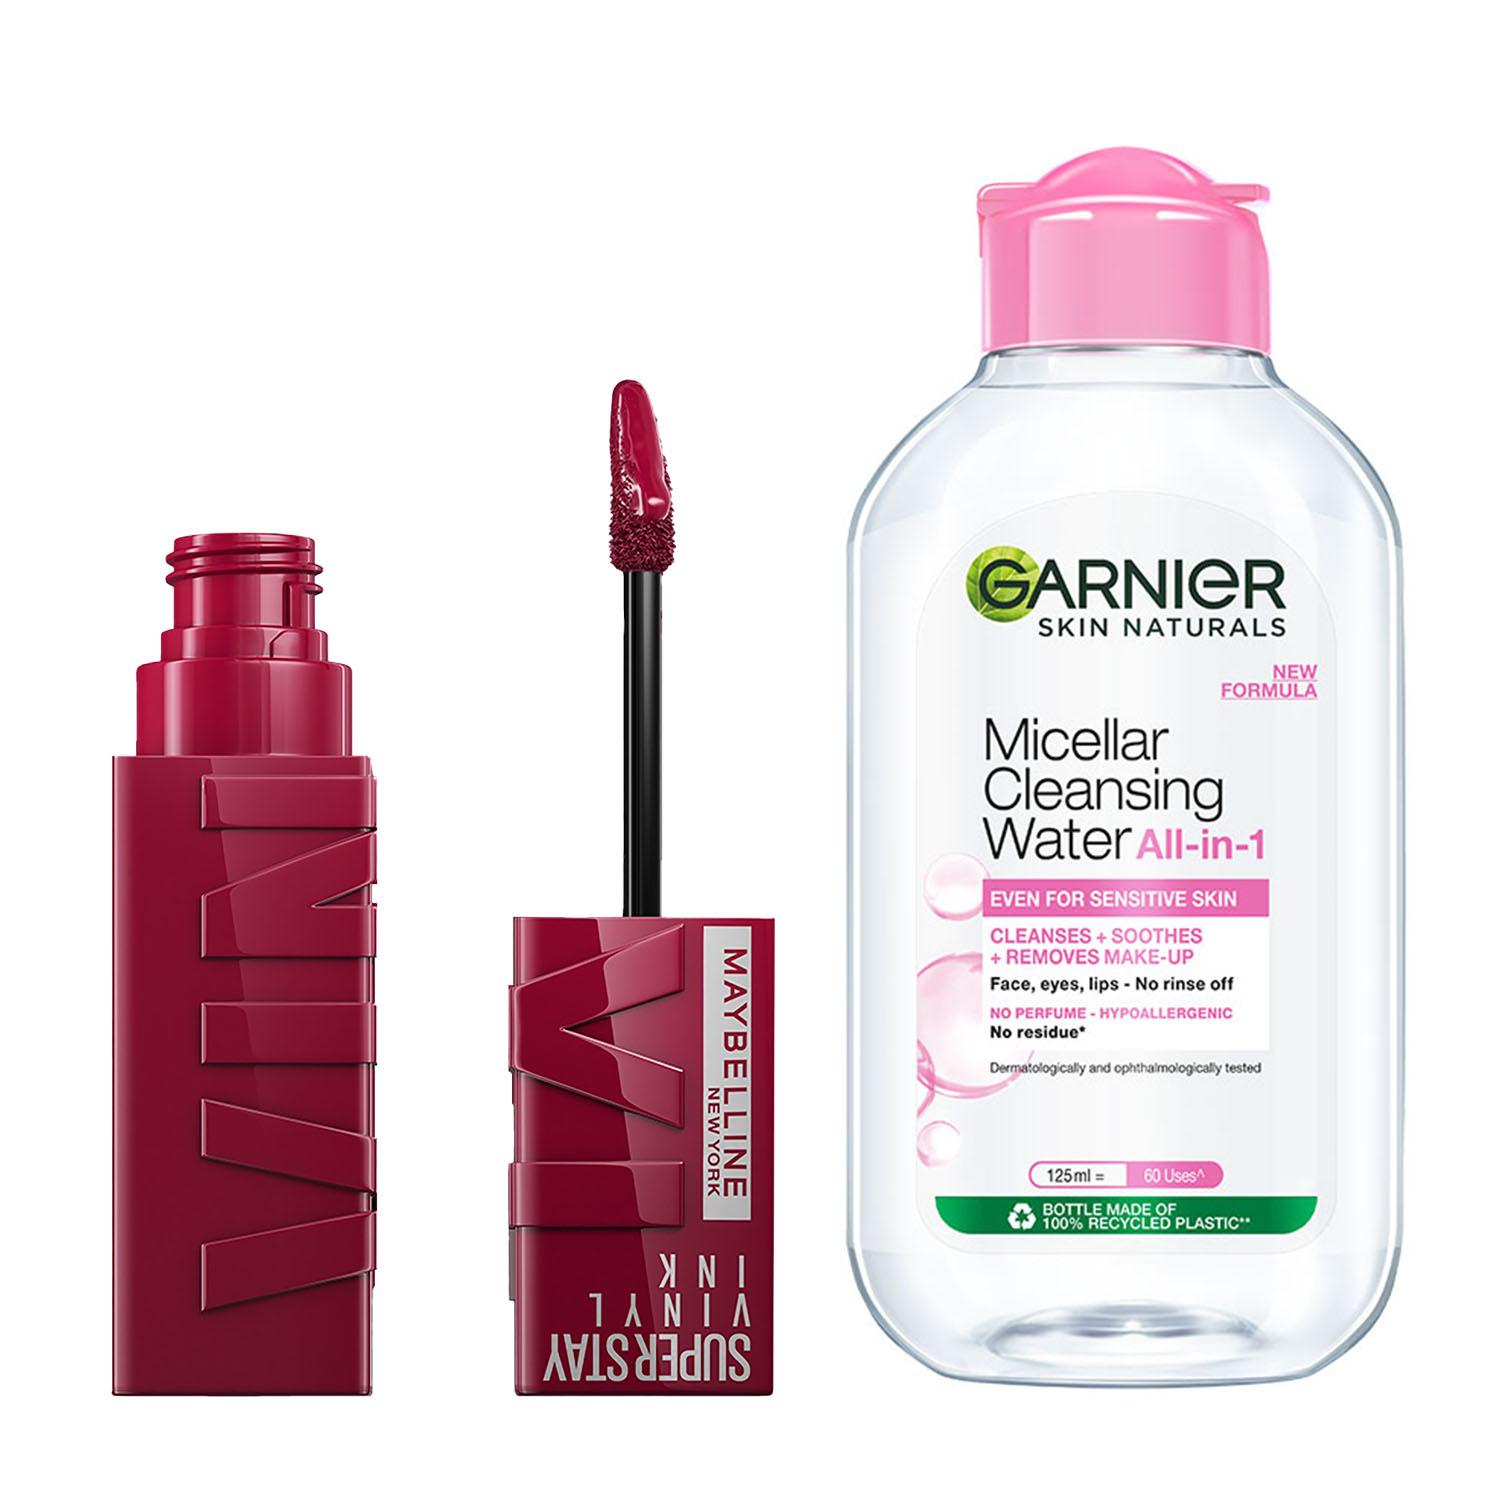 Maybelline New York | Maybelline Superstay Vinyl Ink Liquid Lipstick Unrivaled with Garnier Micellar Cleansing Water Combo